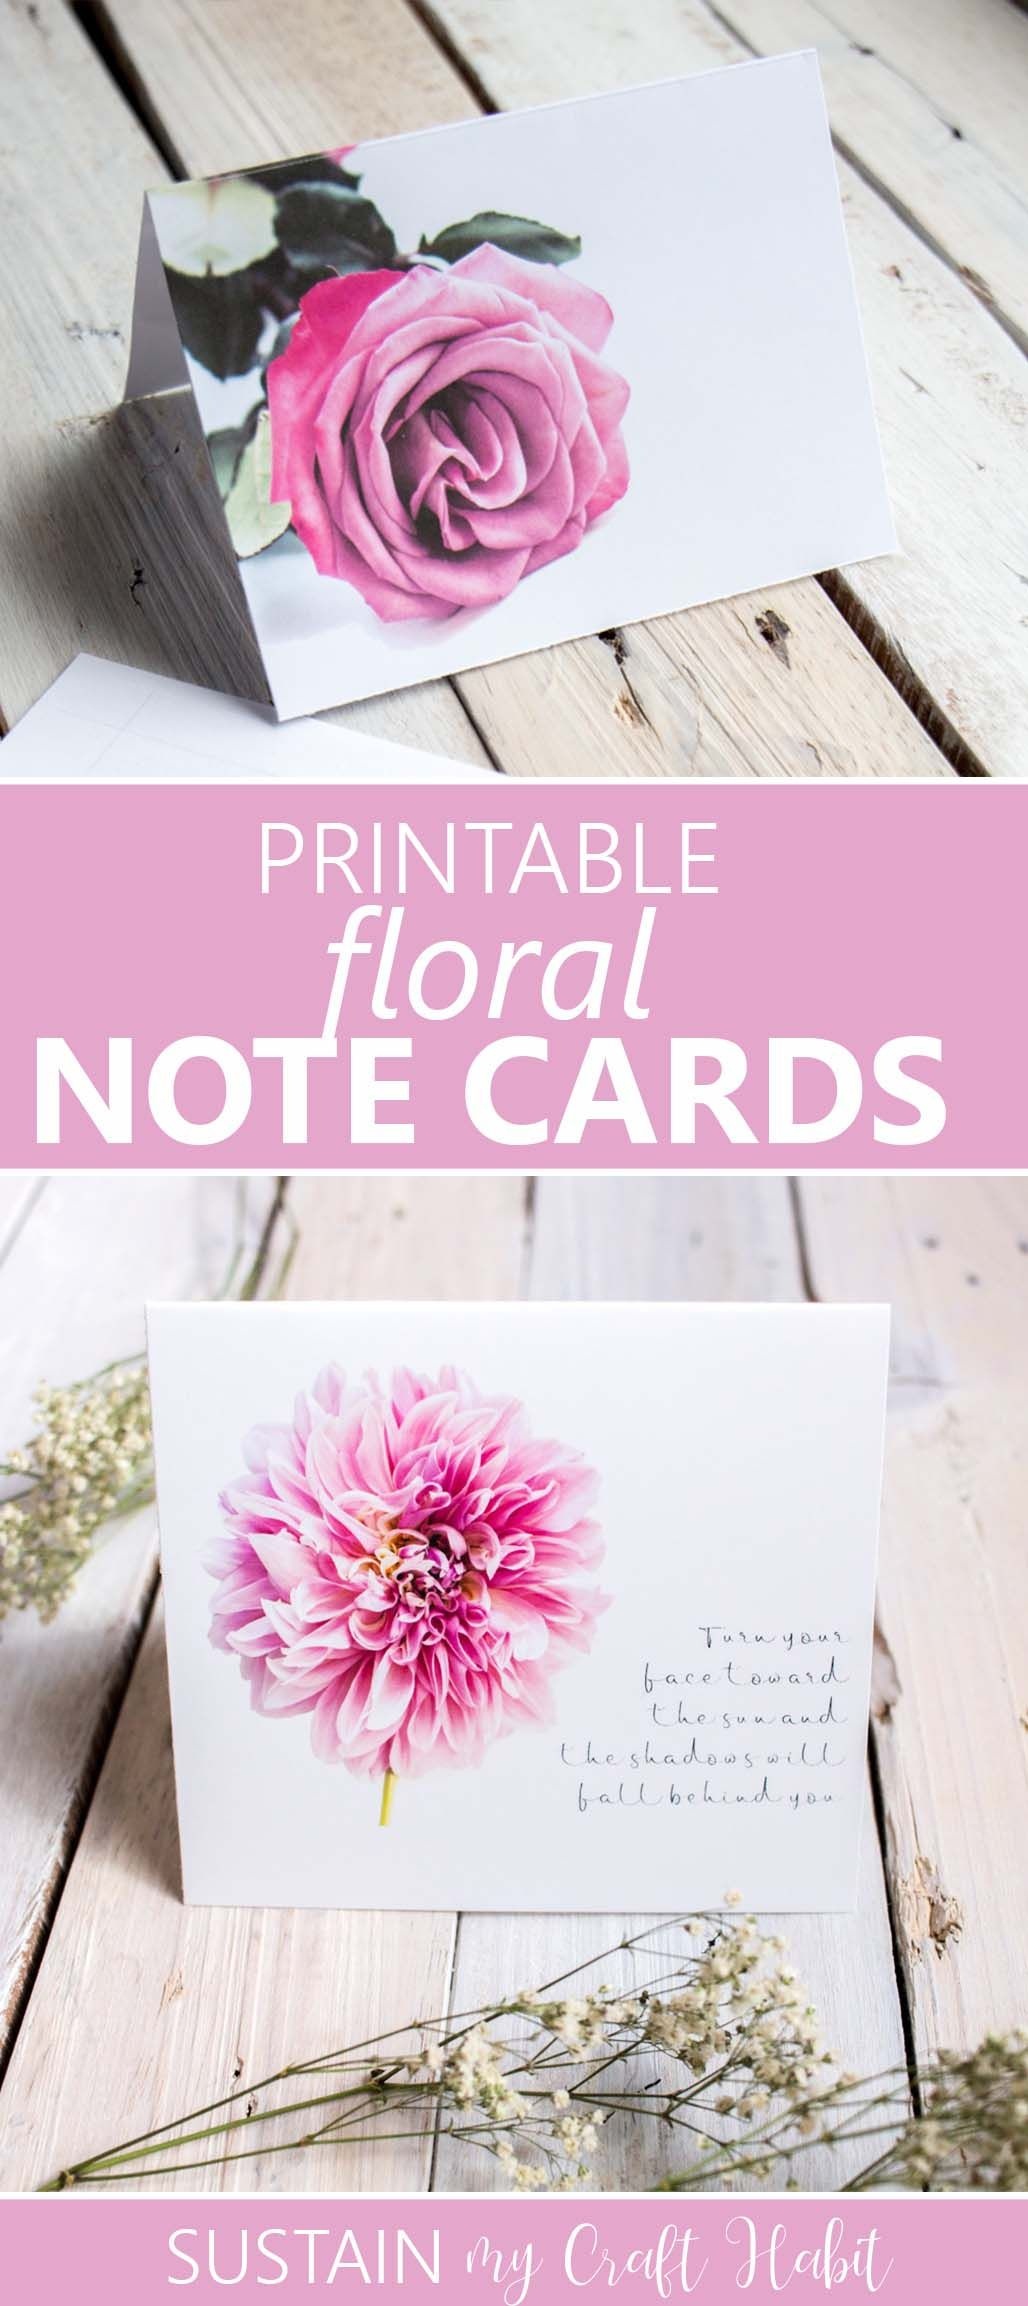 Printable Floral Note Cards | Free Printables  | Pinterest - Free Printable Special Occasion Cards